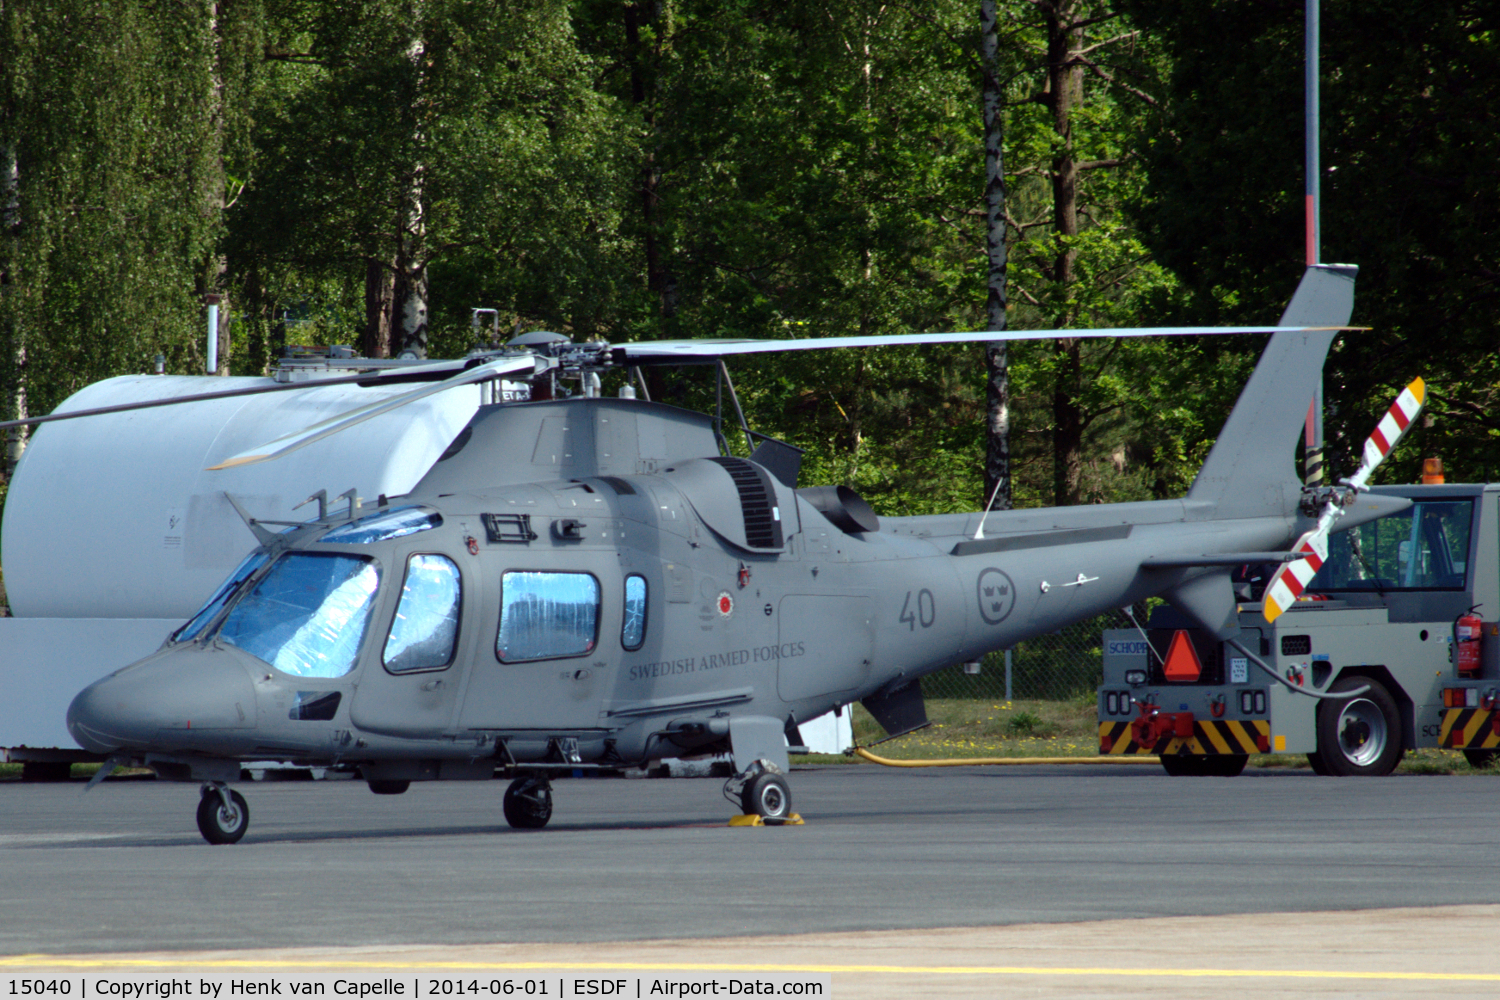 15040, Agusta Hkp15B (A-109E LUH) C/N 13770, Agusta Hkp15B helicopter of the Swedish Defense Helicopter Wing at Ronneby Air Base